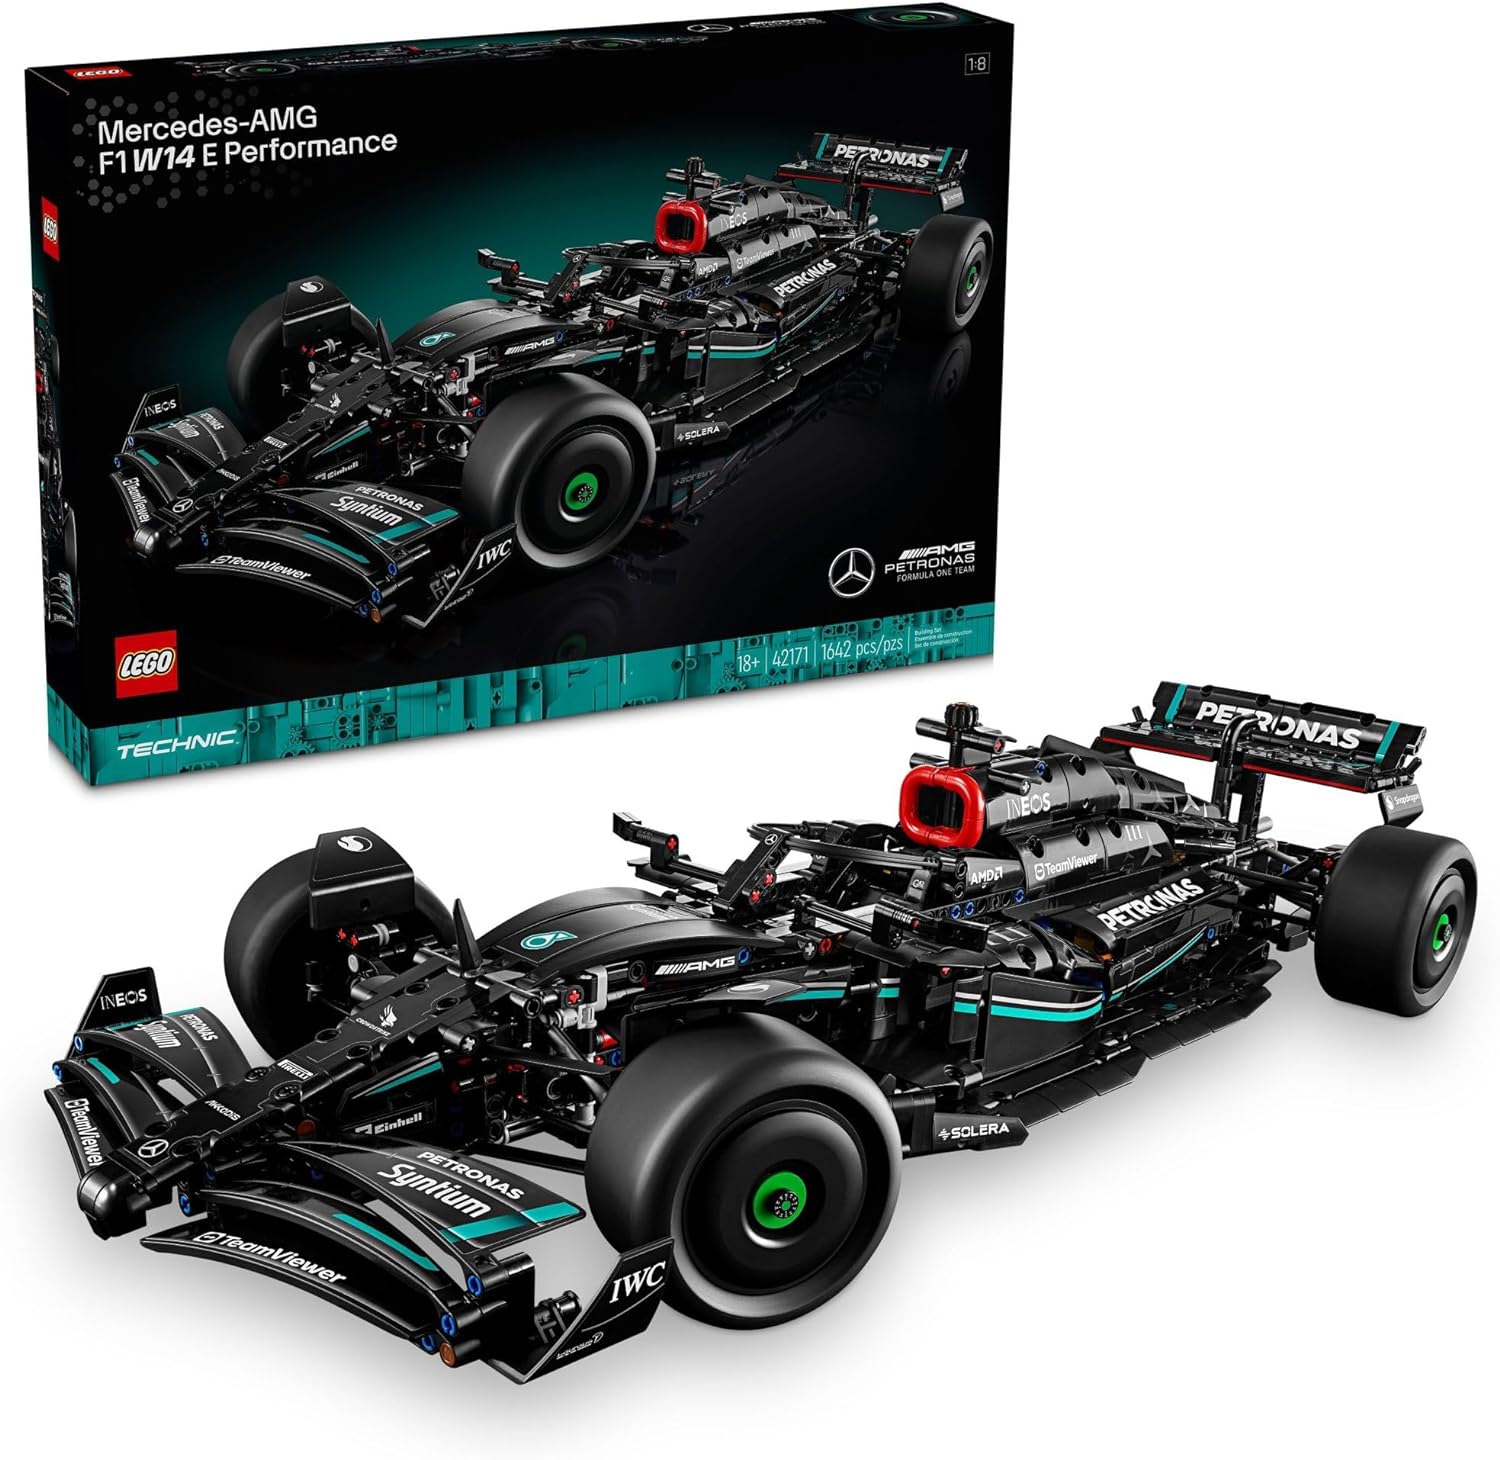 LEGO 42171 Technic Mercedes-AMG F1 W14 E Performance Race Car Building Set for Adults, Model Car Gift for Father's Day, Authentically Detailed Build and Display Model for Home or Office Décor